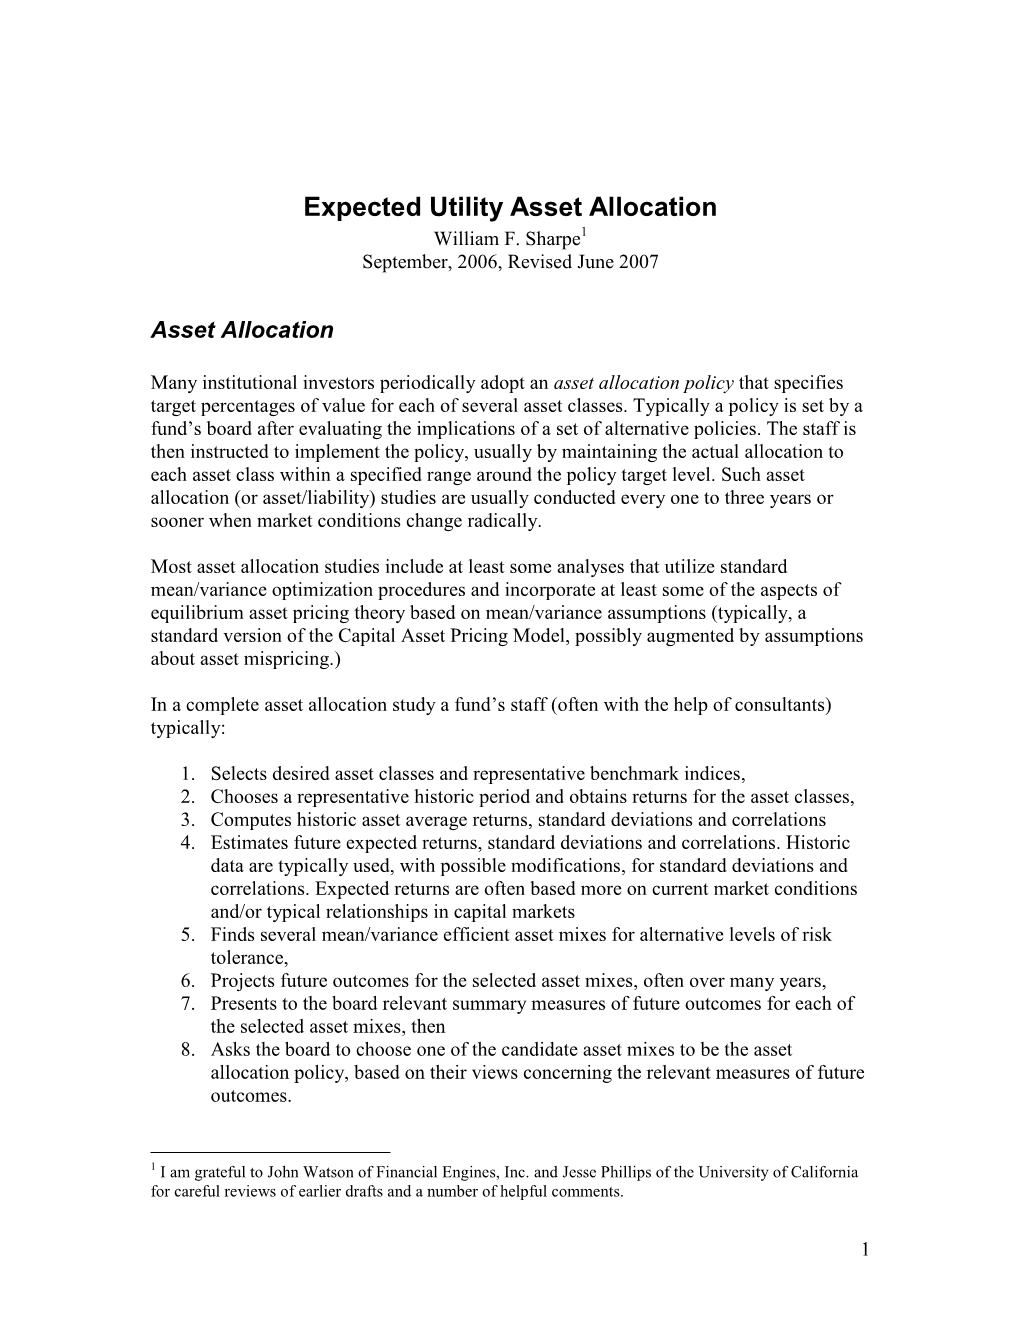 Expected Utility Asset Allocation William F